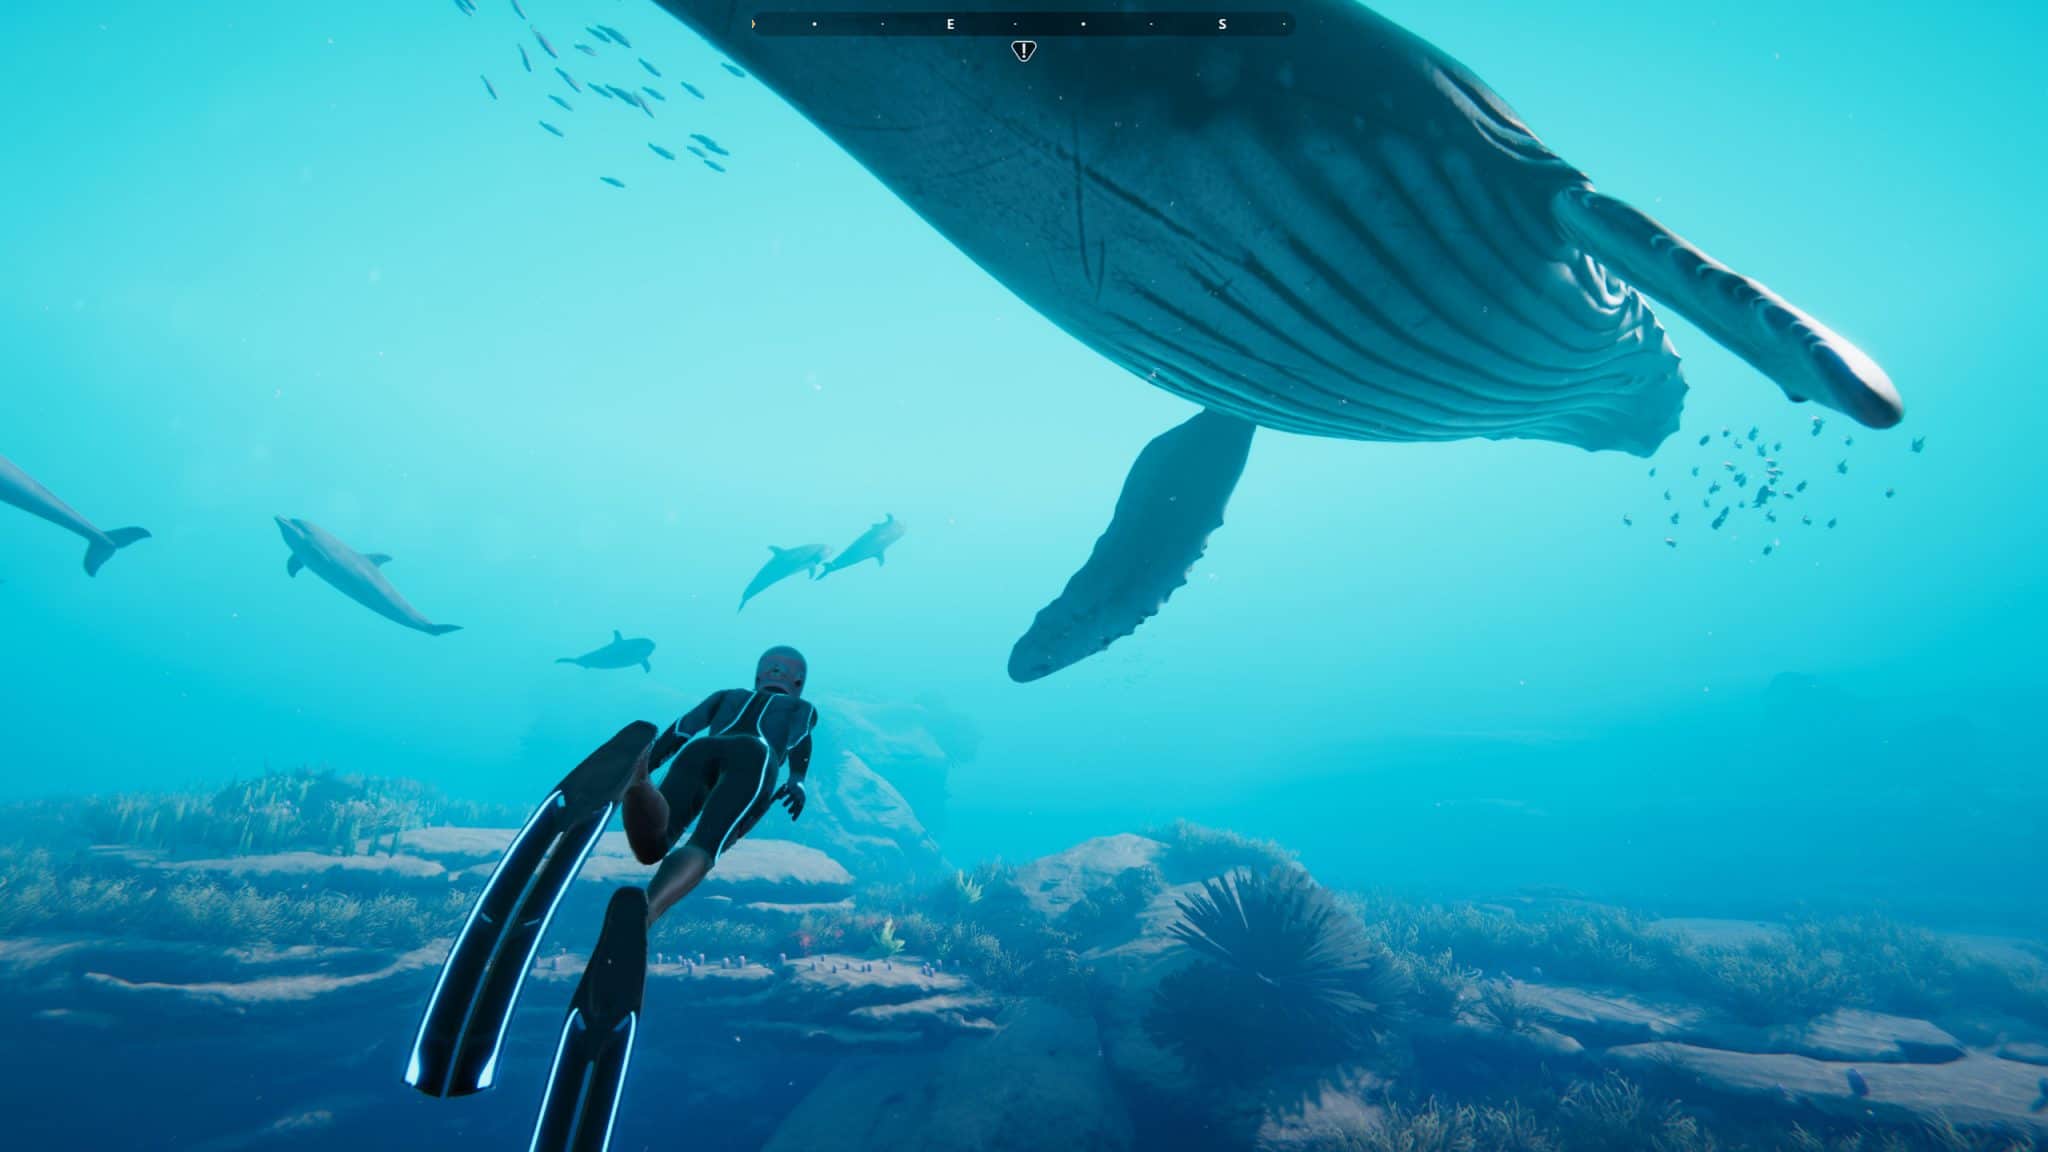 Underwater Exploration Game ‘Beyond Blue’ Gets New Gameplay Trailer Ahead of Launch